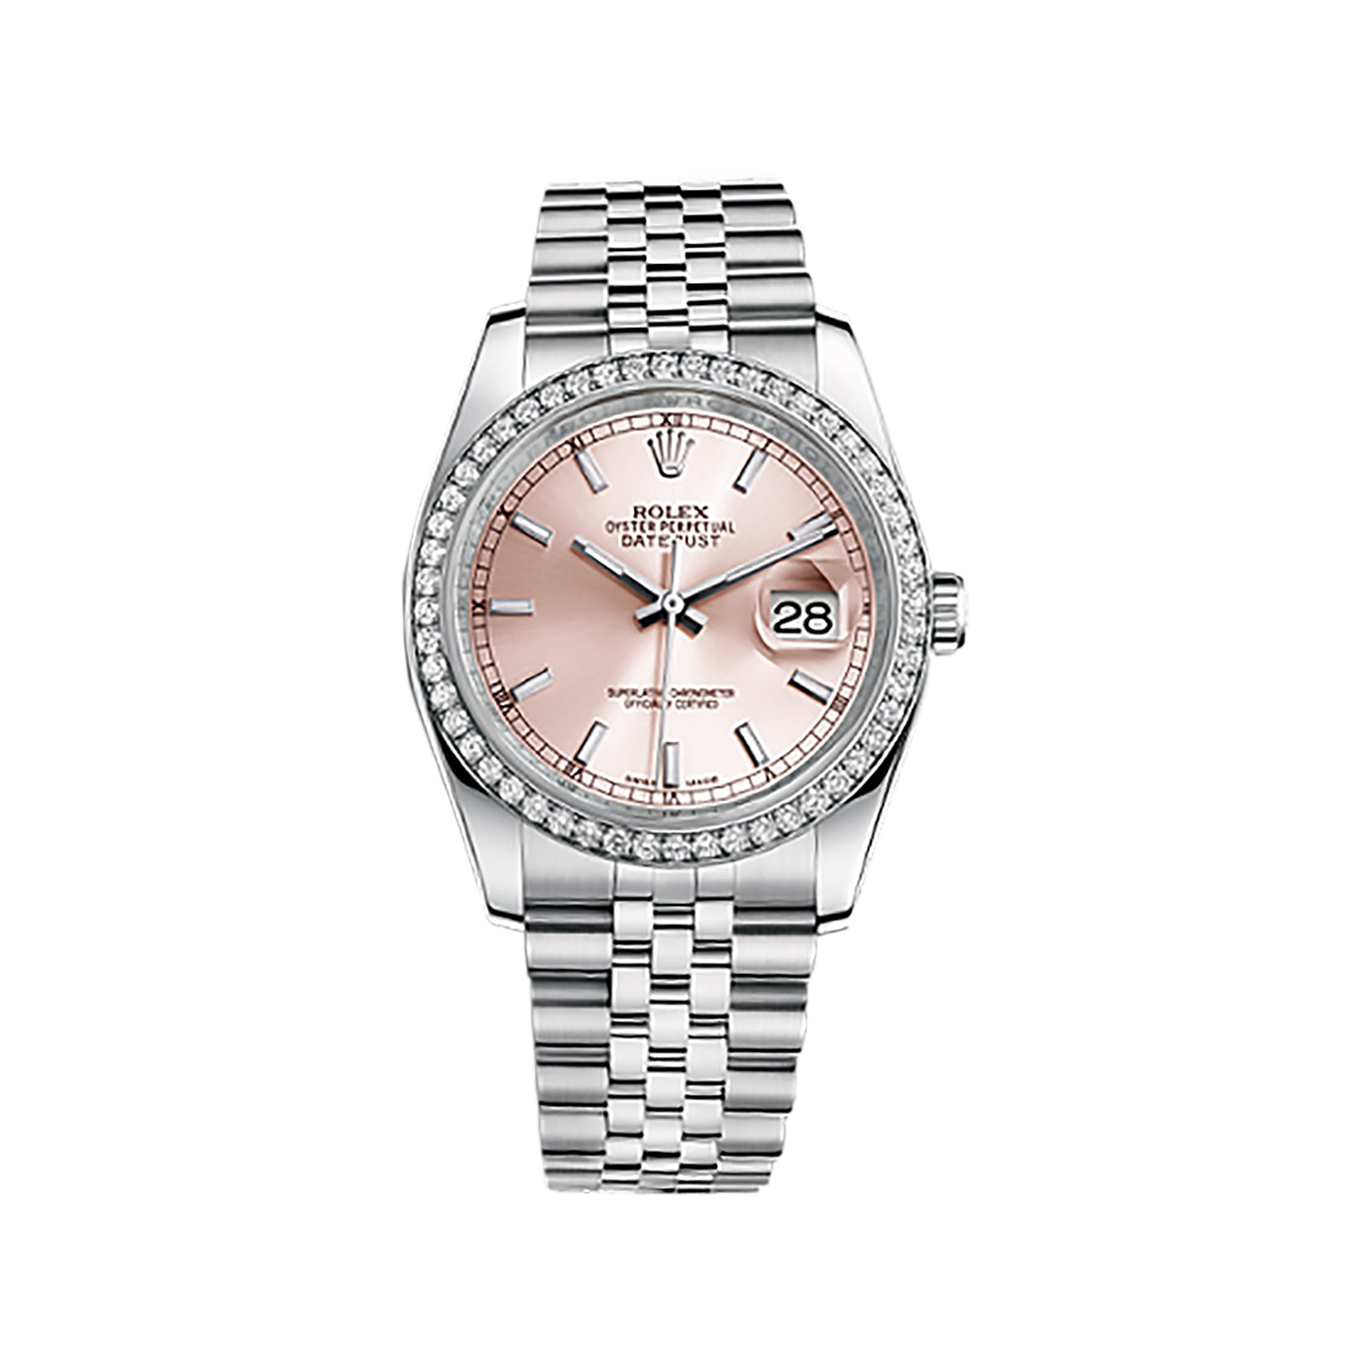 Datejust 36 116244 White Gold & Stainless Steel Watch (Pink)